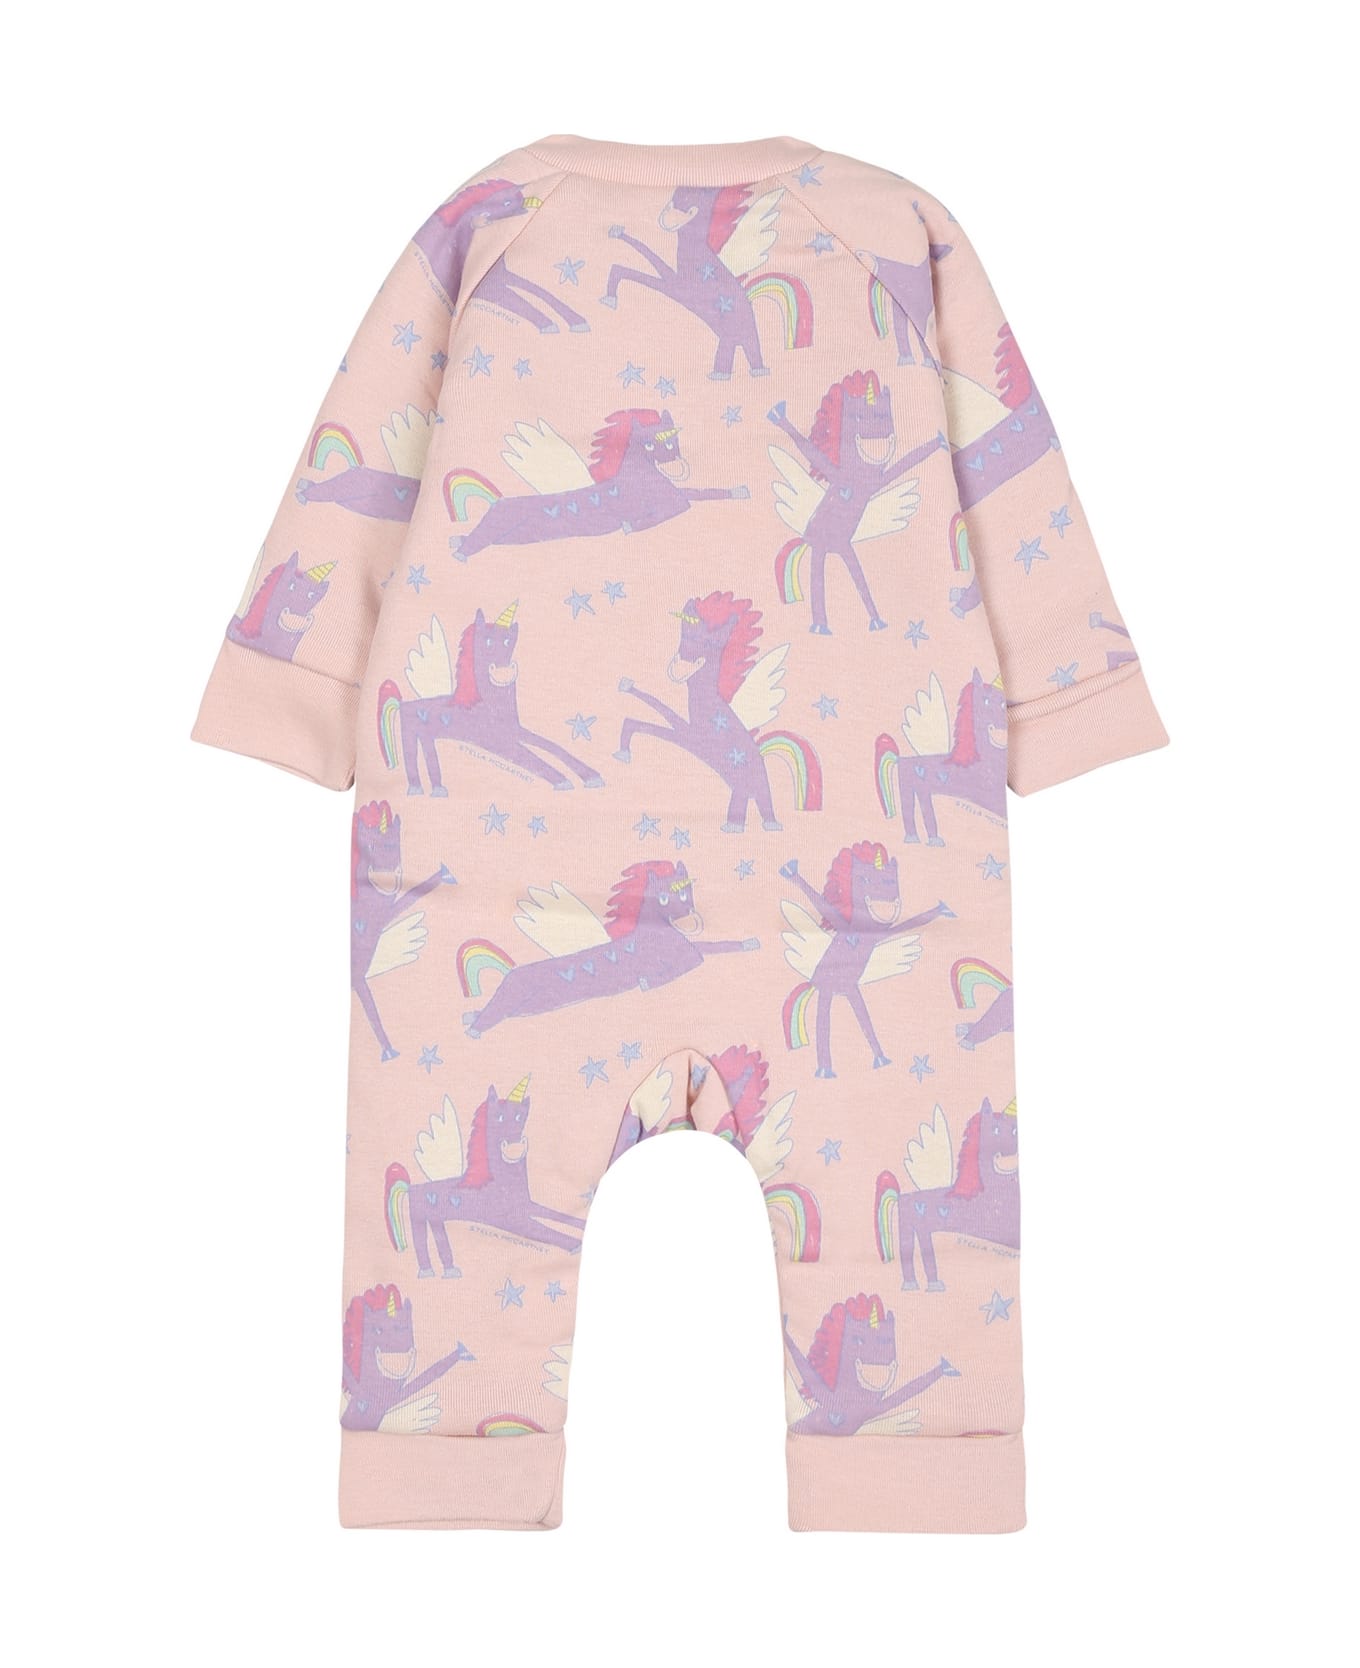 Stella McCartney Kids Pink Babygrow For Baby Girl With Unicors - Pink